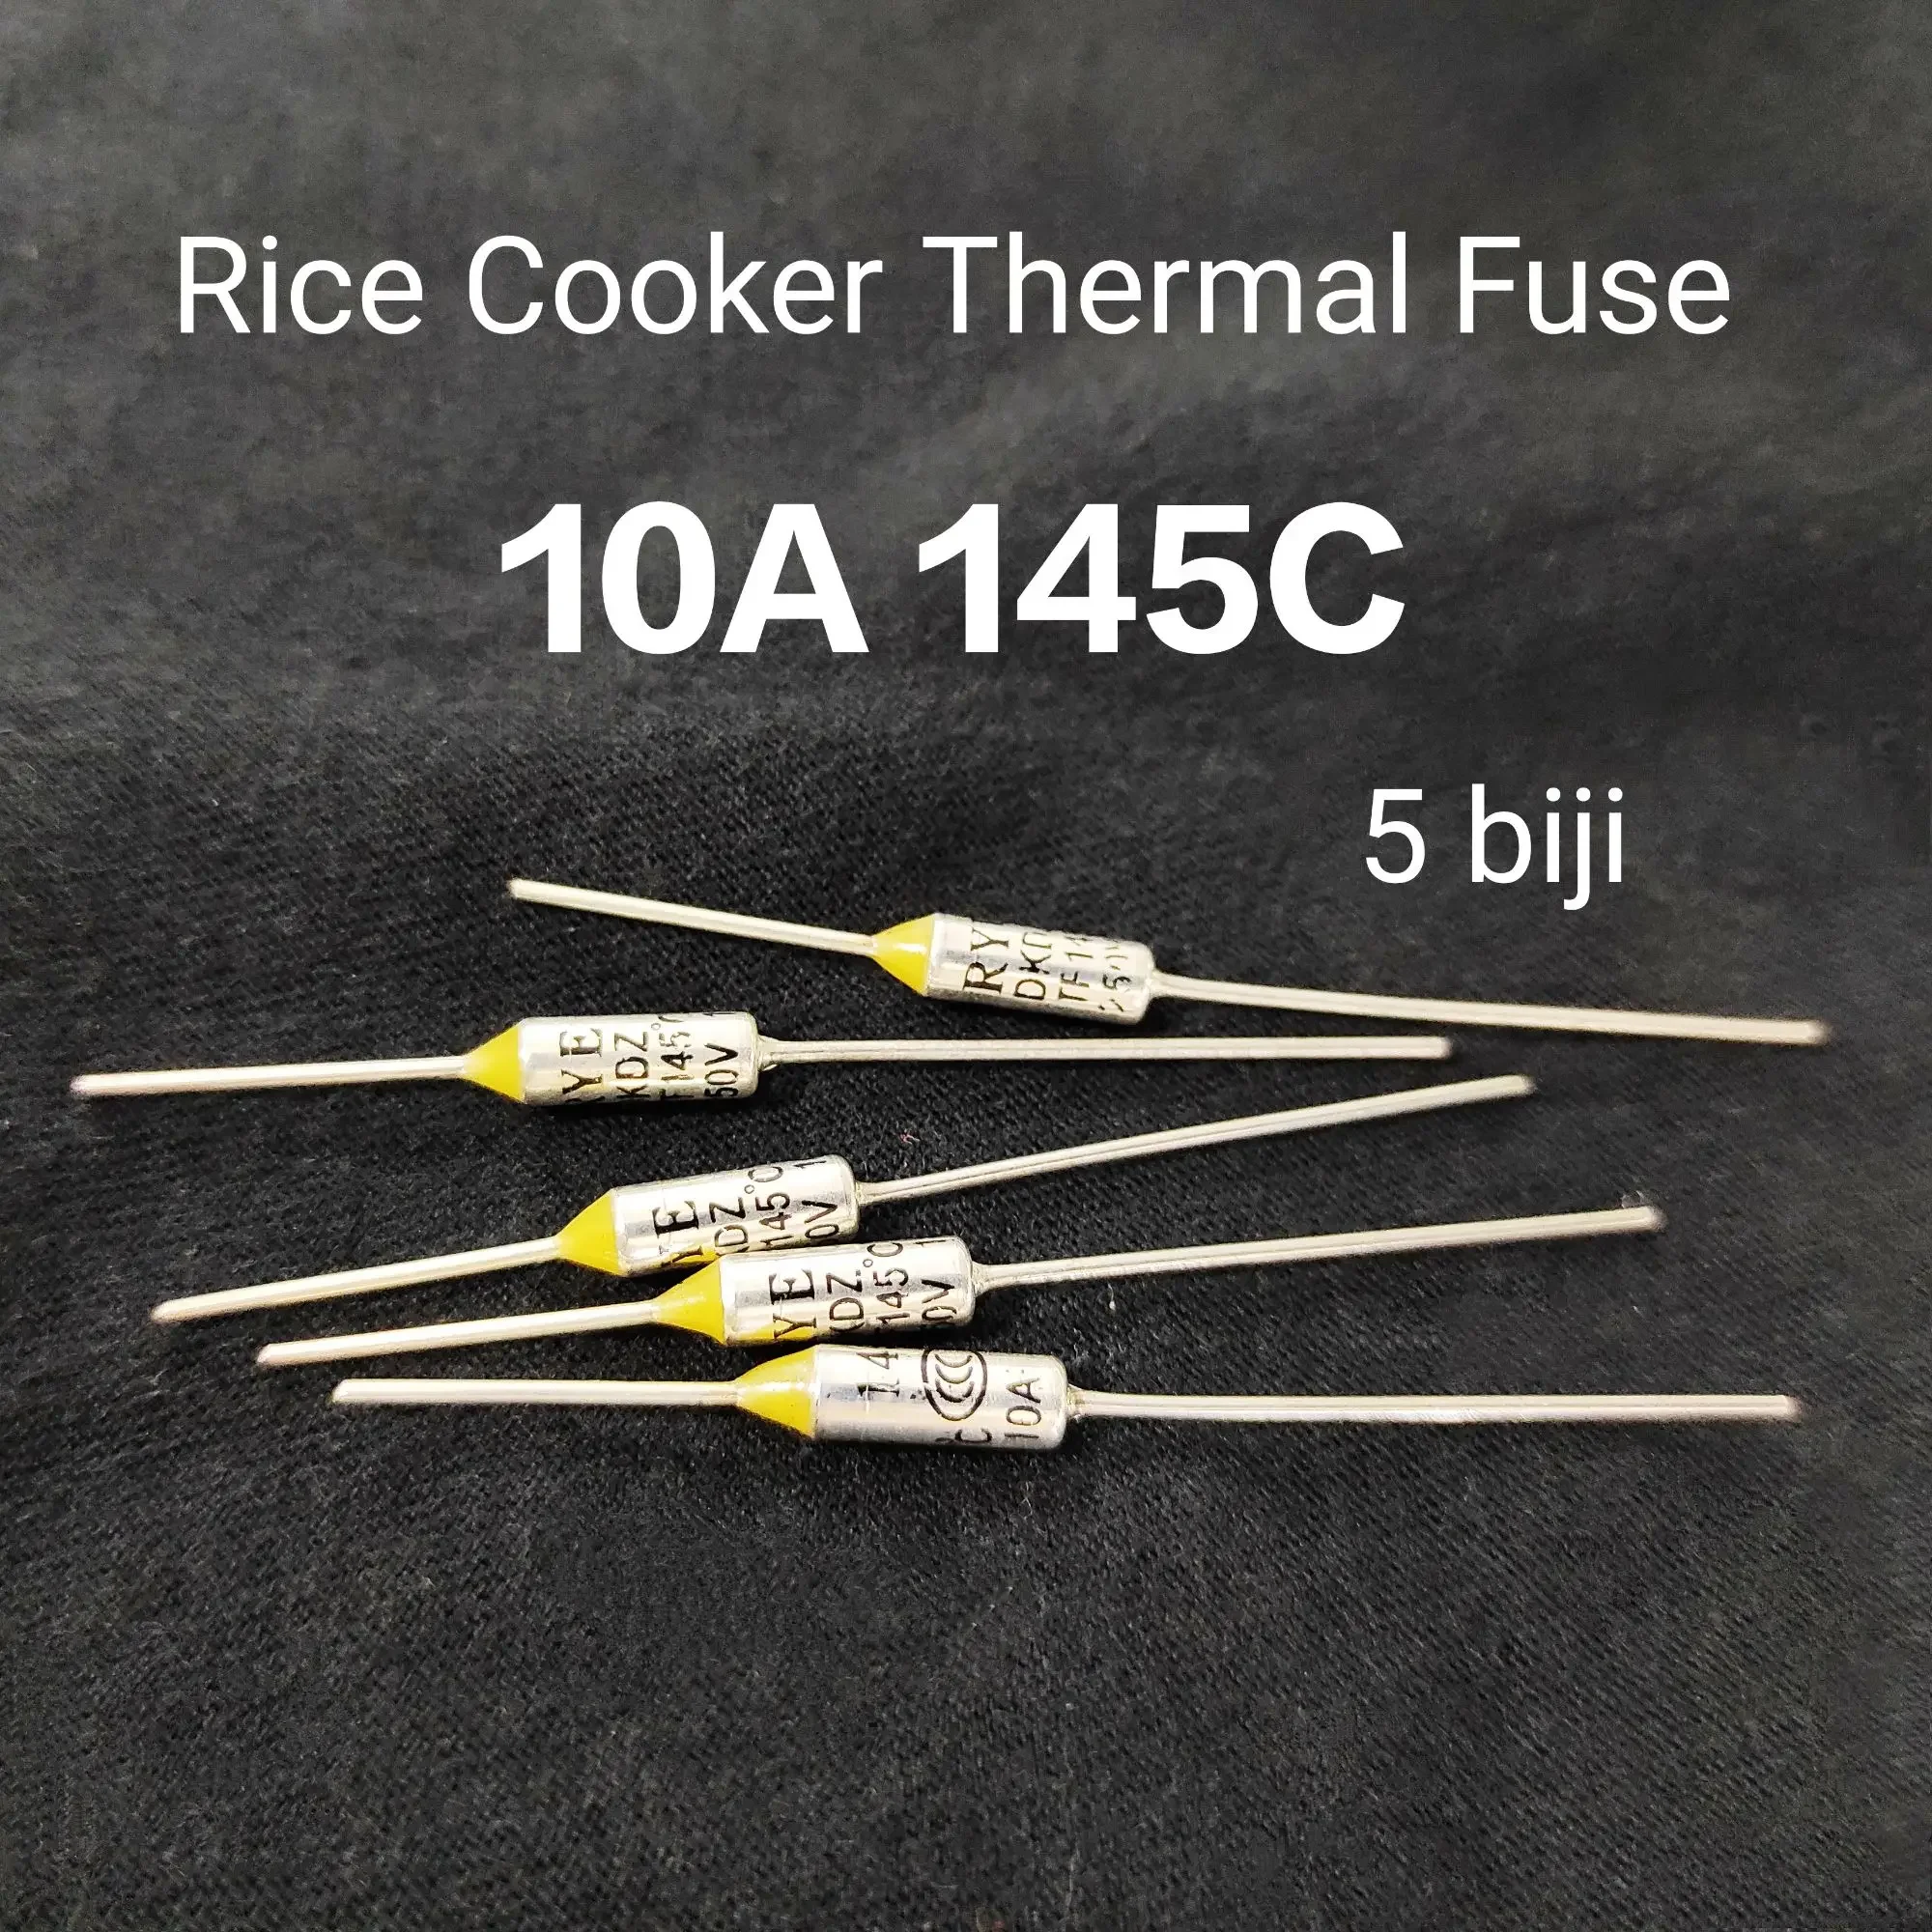 5 biji 10A 145C Rice Cooker Thermal Fuse thermo fuse 10a 145c